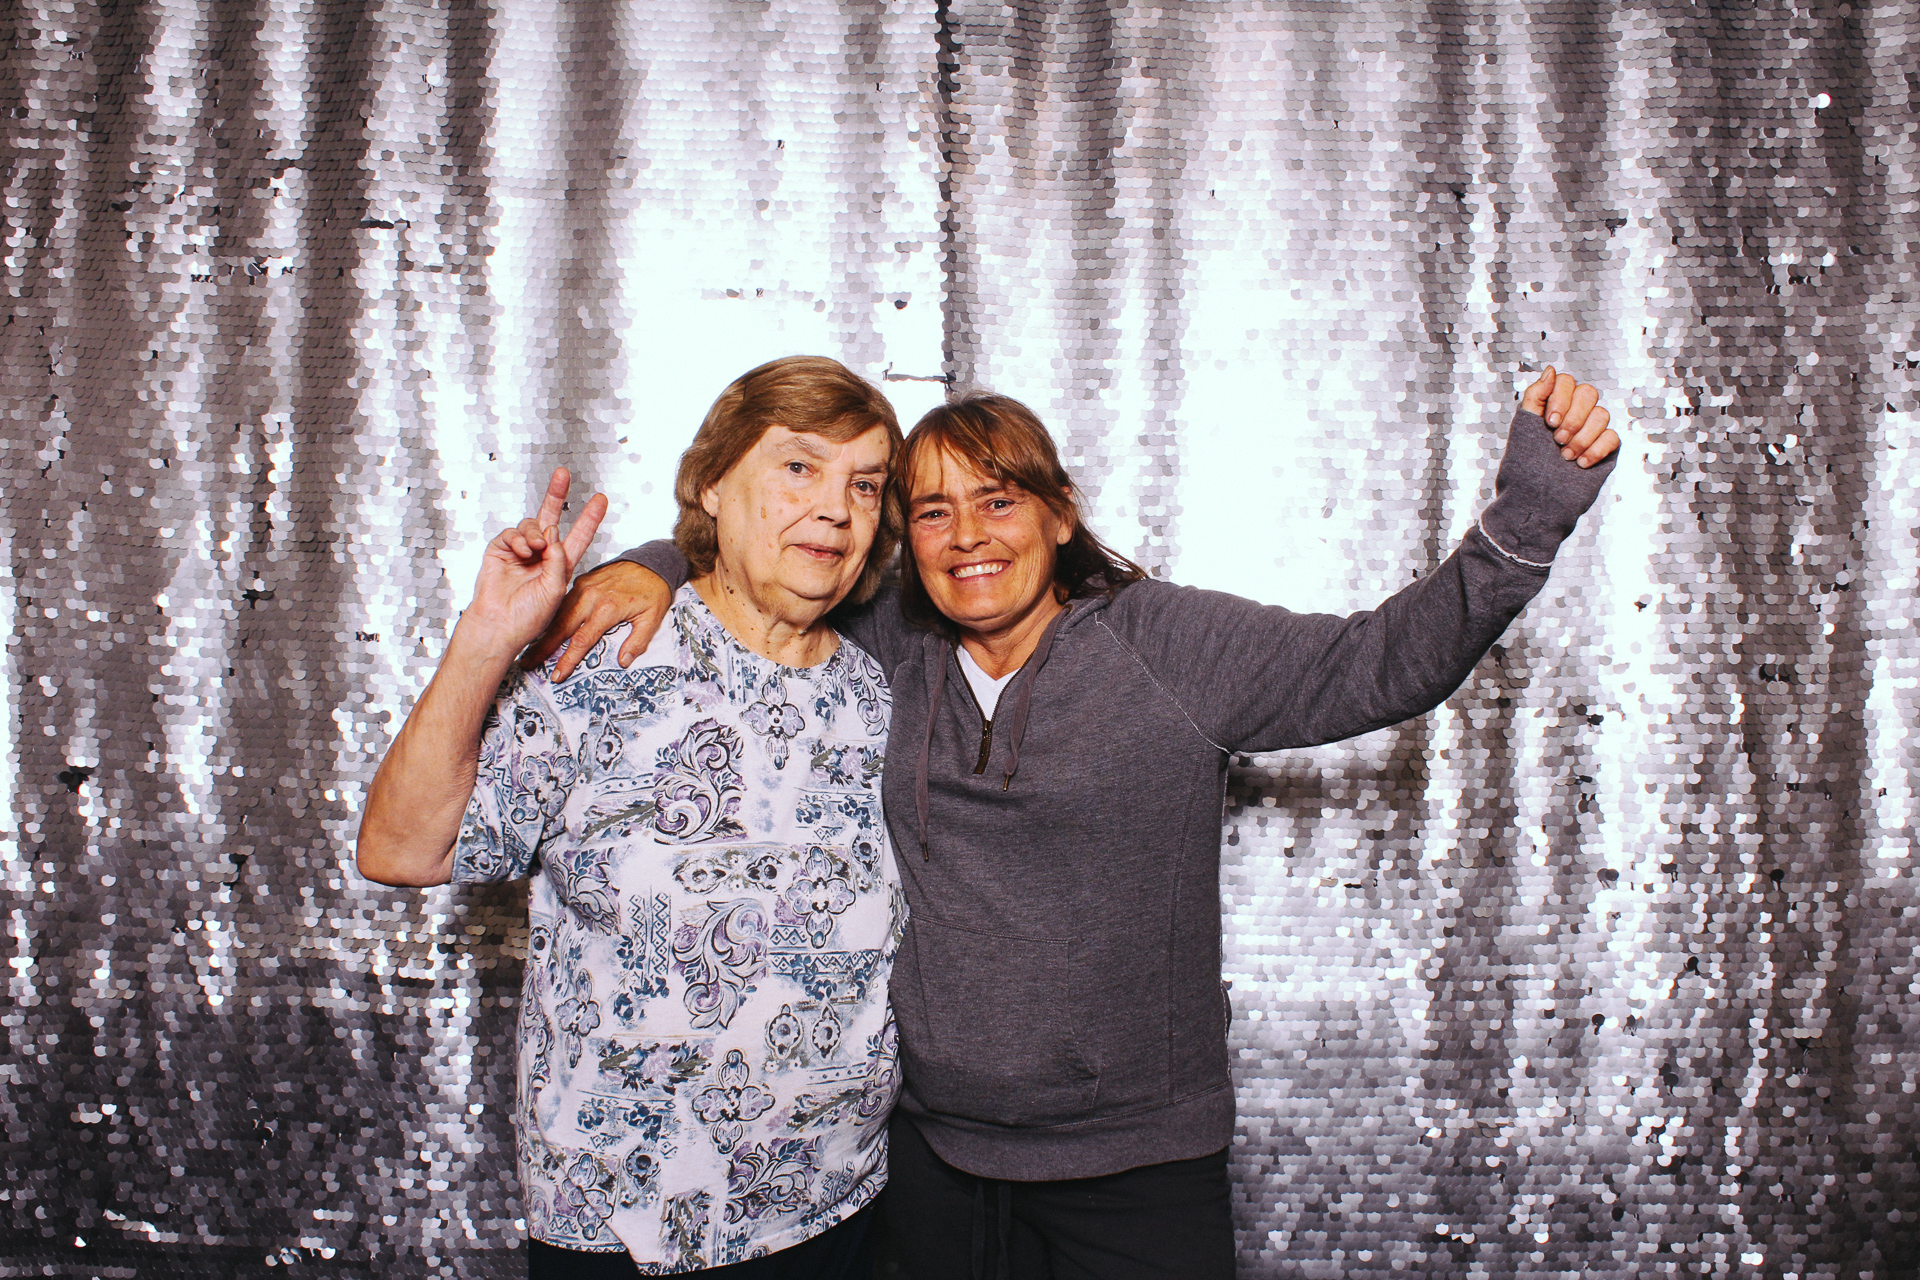 00005-78th Street Studios Third Friday Photobooth by Too Much Awesomeness-20140620.jpg